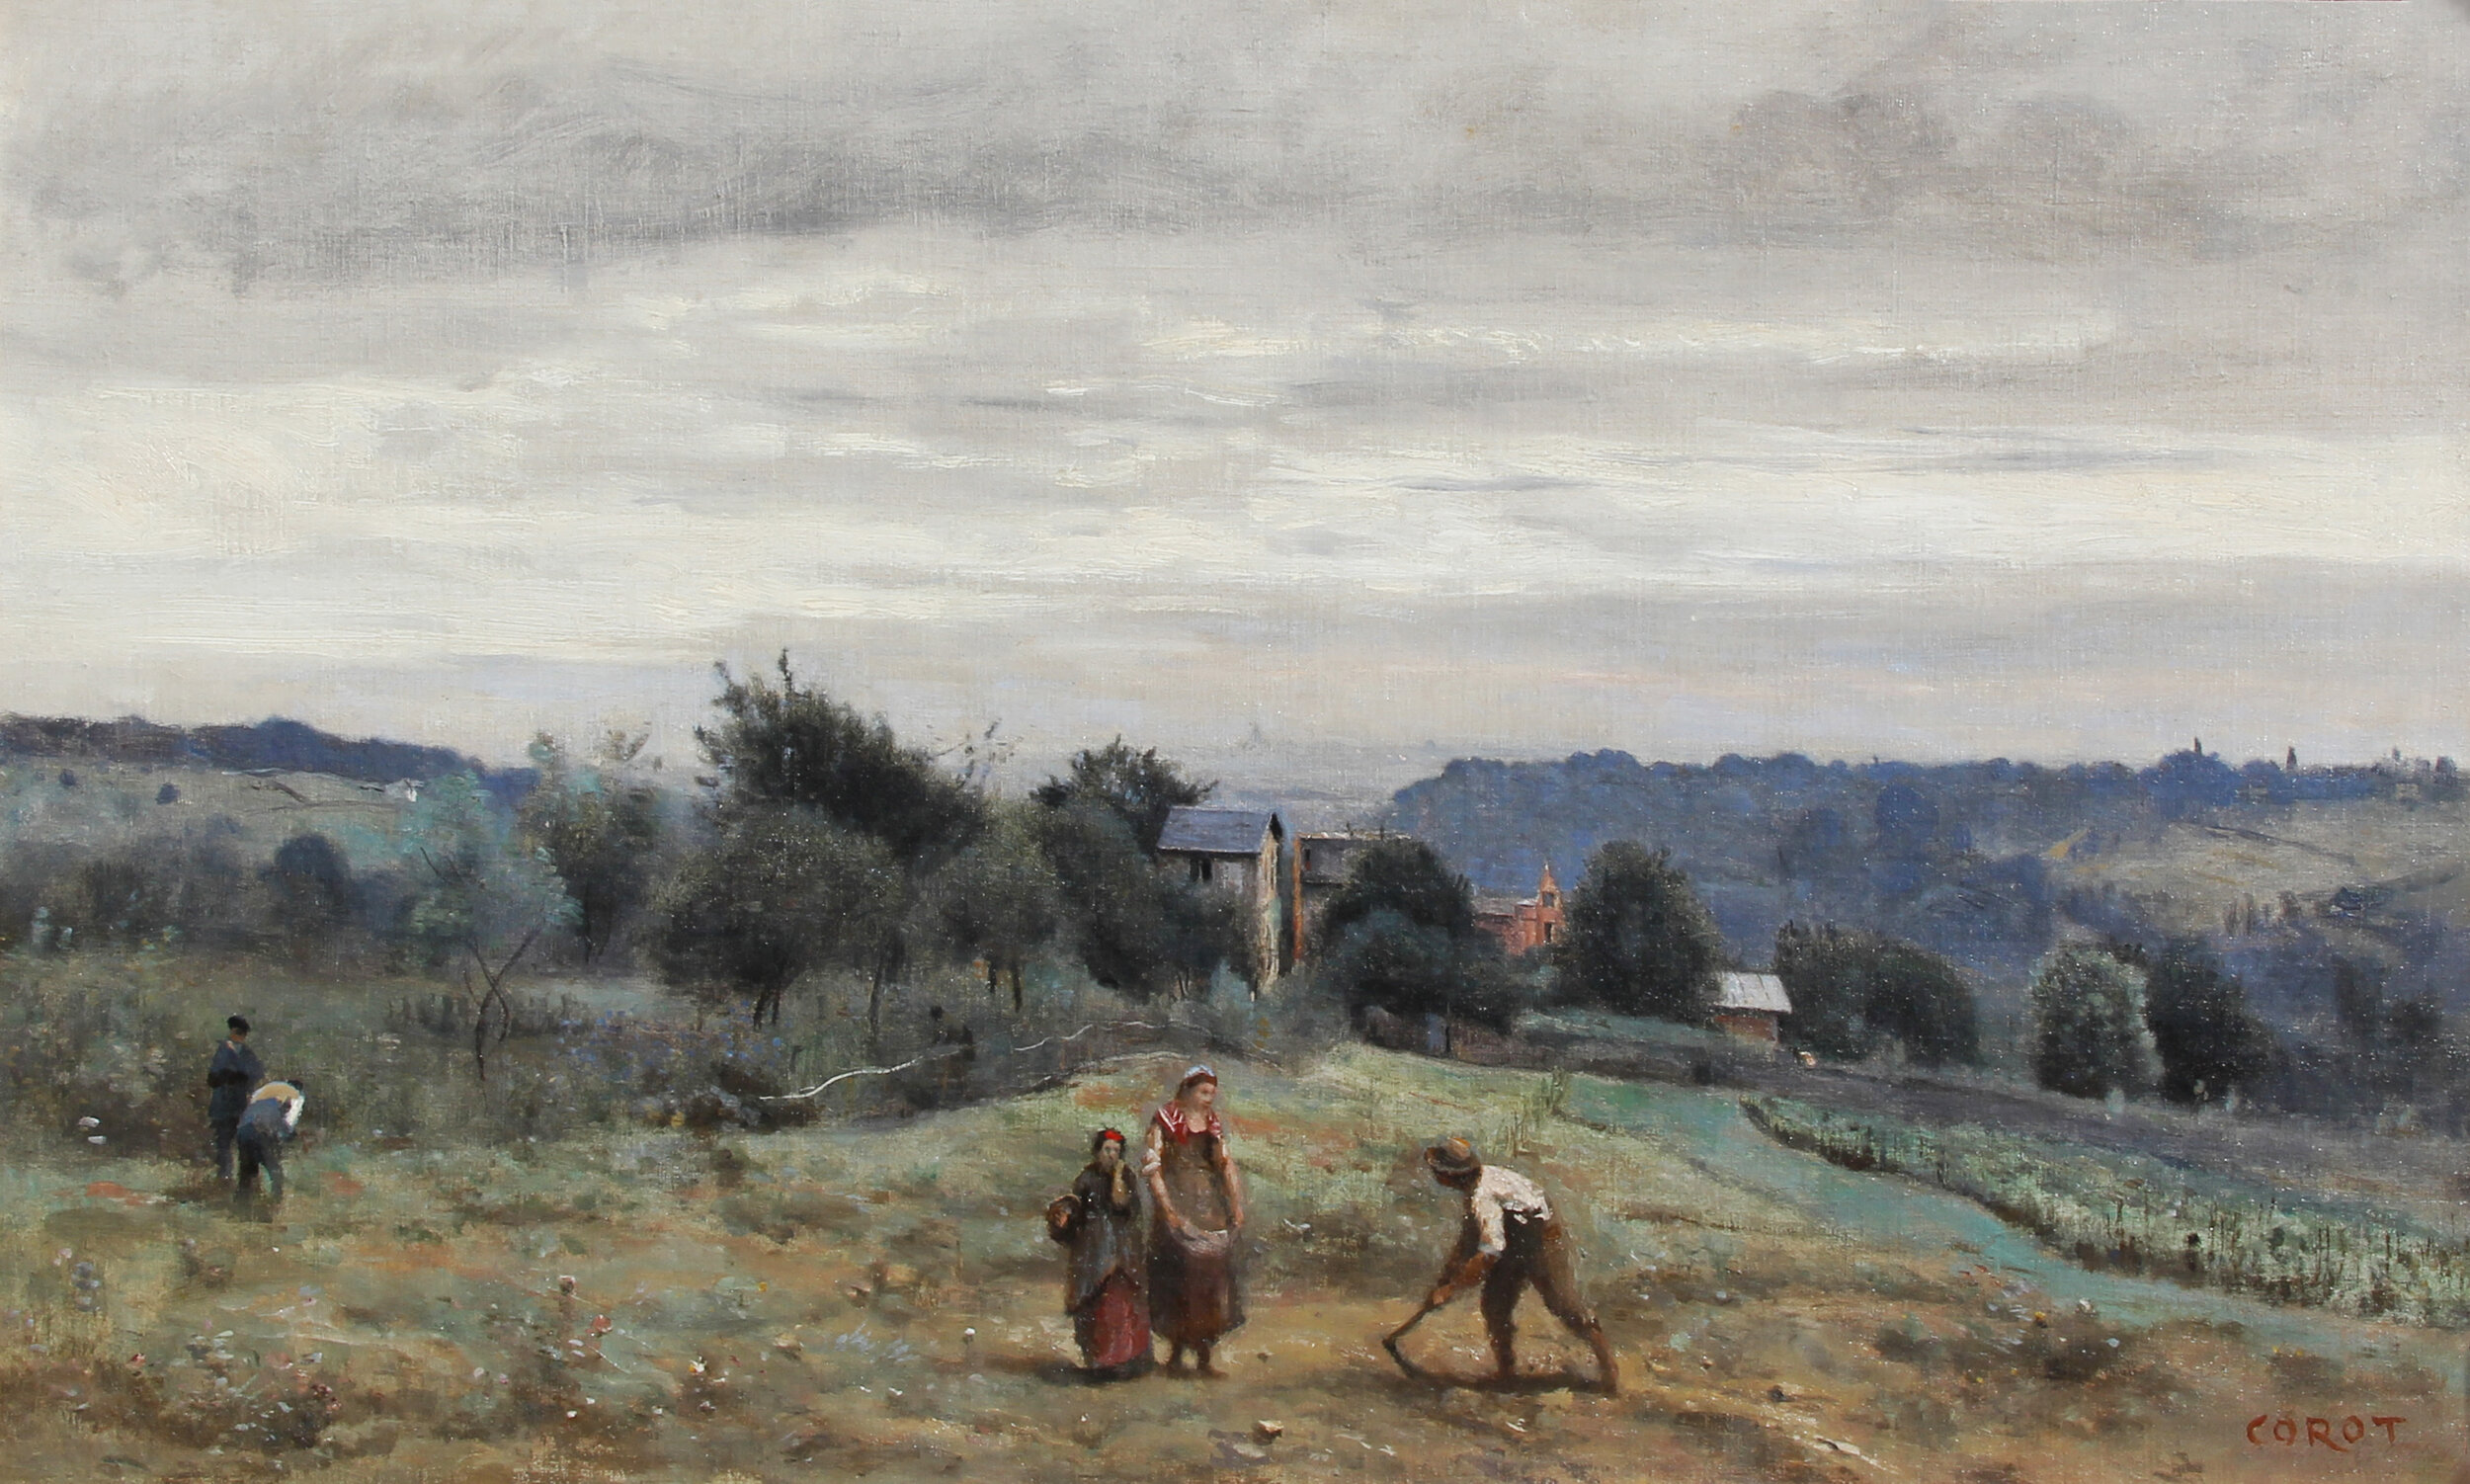   JEAN-BAPTISTE CAMILLE COROT    French, 1796–1875   Ville d’Avray - Sur les Hauteurs   Signed COROT Oil on canvas 16¾ x 27 inches (42.5 x 68.5 cm) Framed: 23 x 34 inches (58.5 x 86.3 cm) 